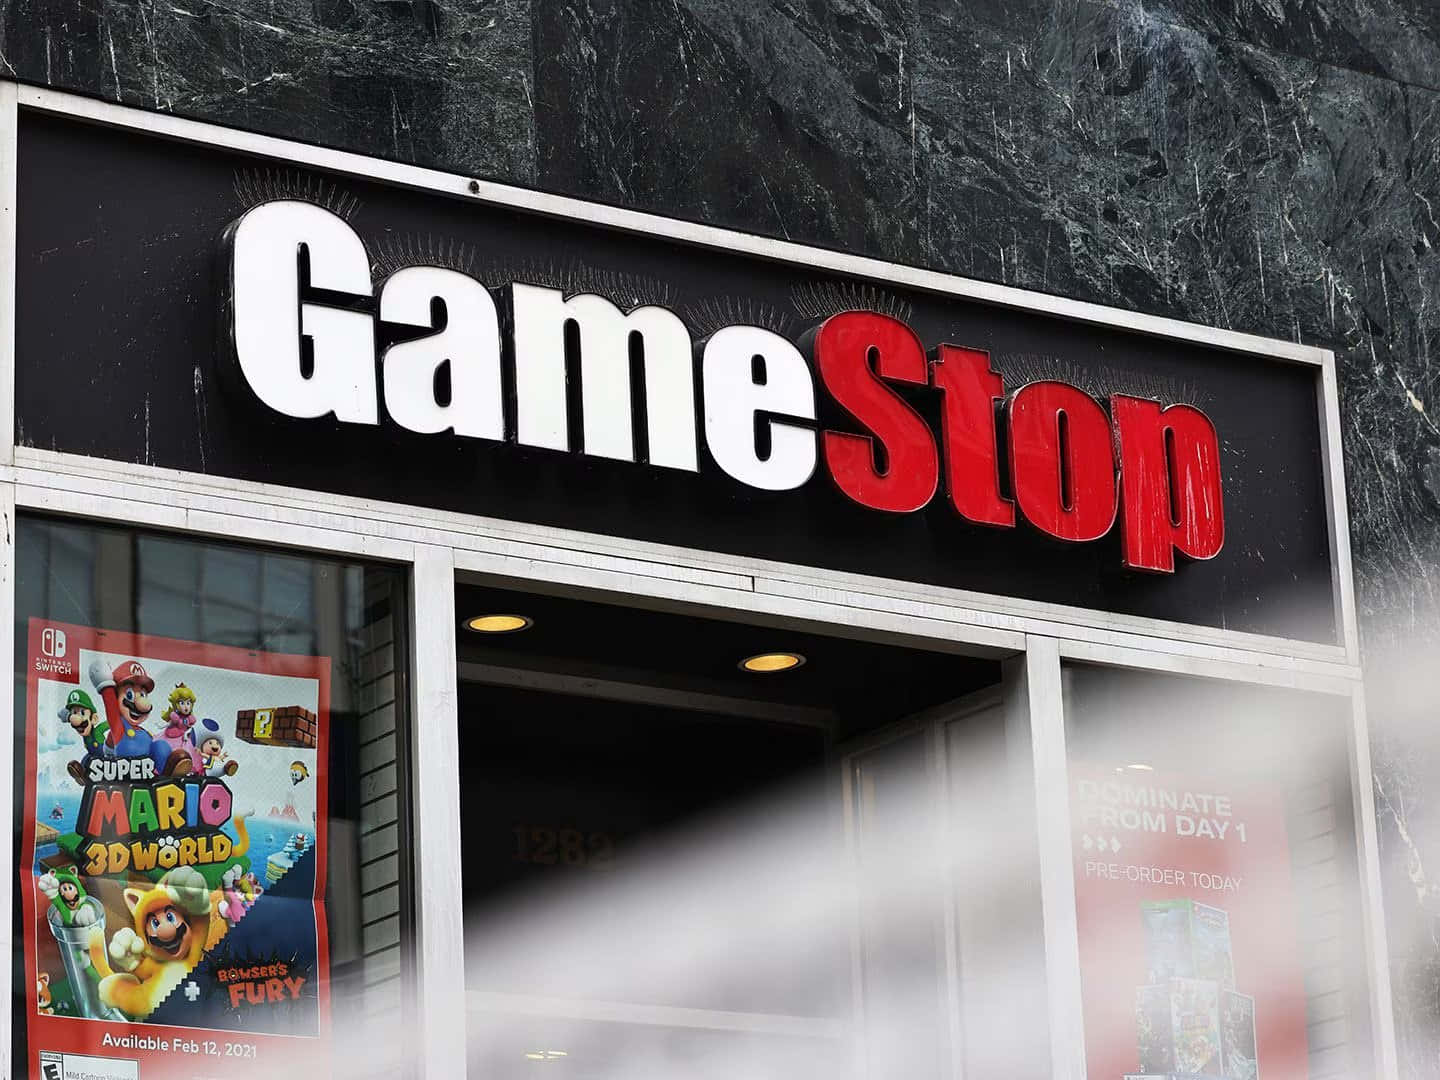 Level up your Gaming Experience with Gamestop